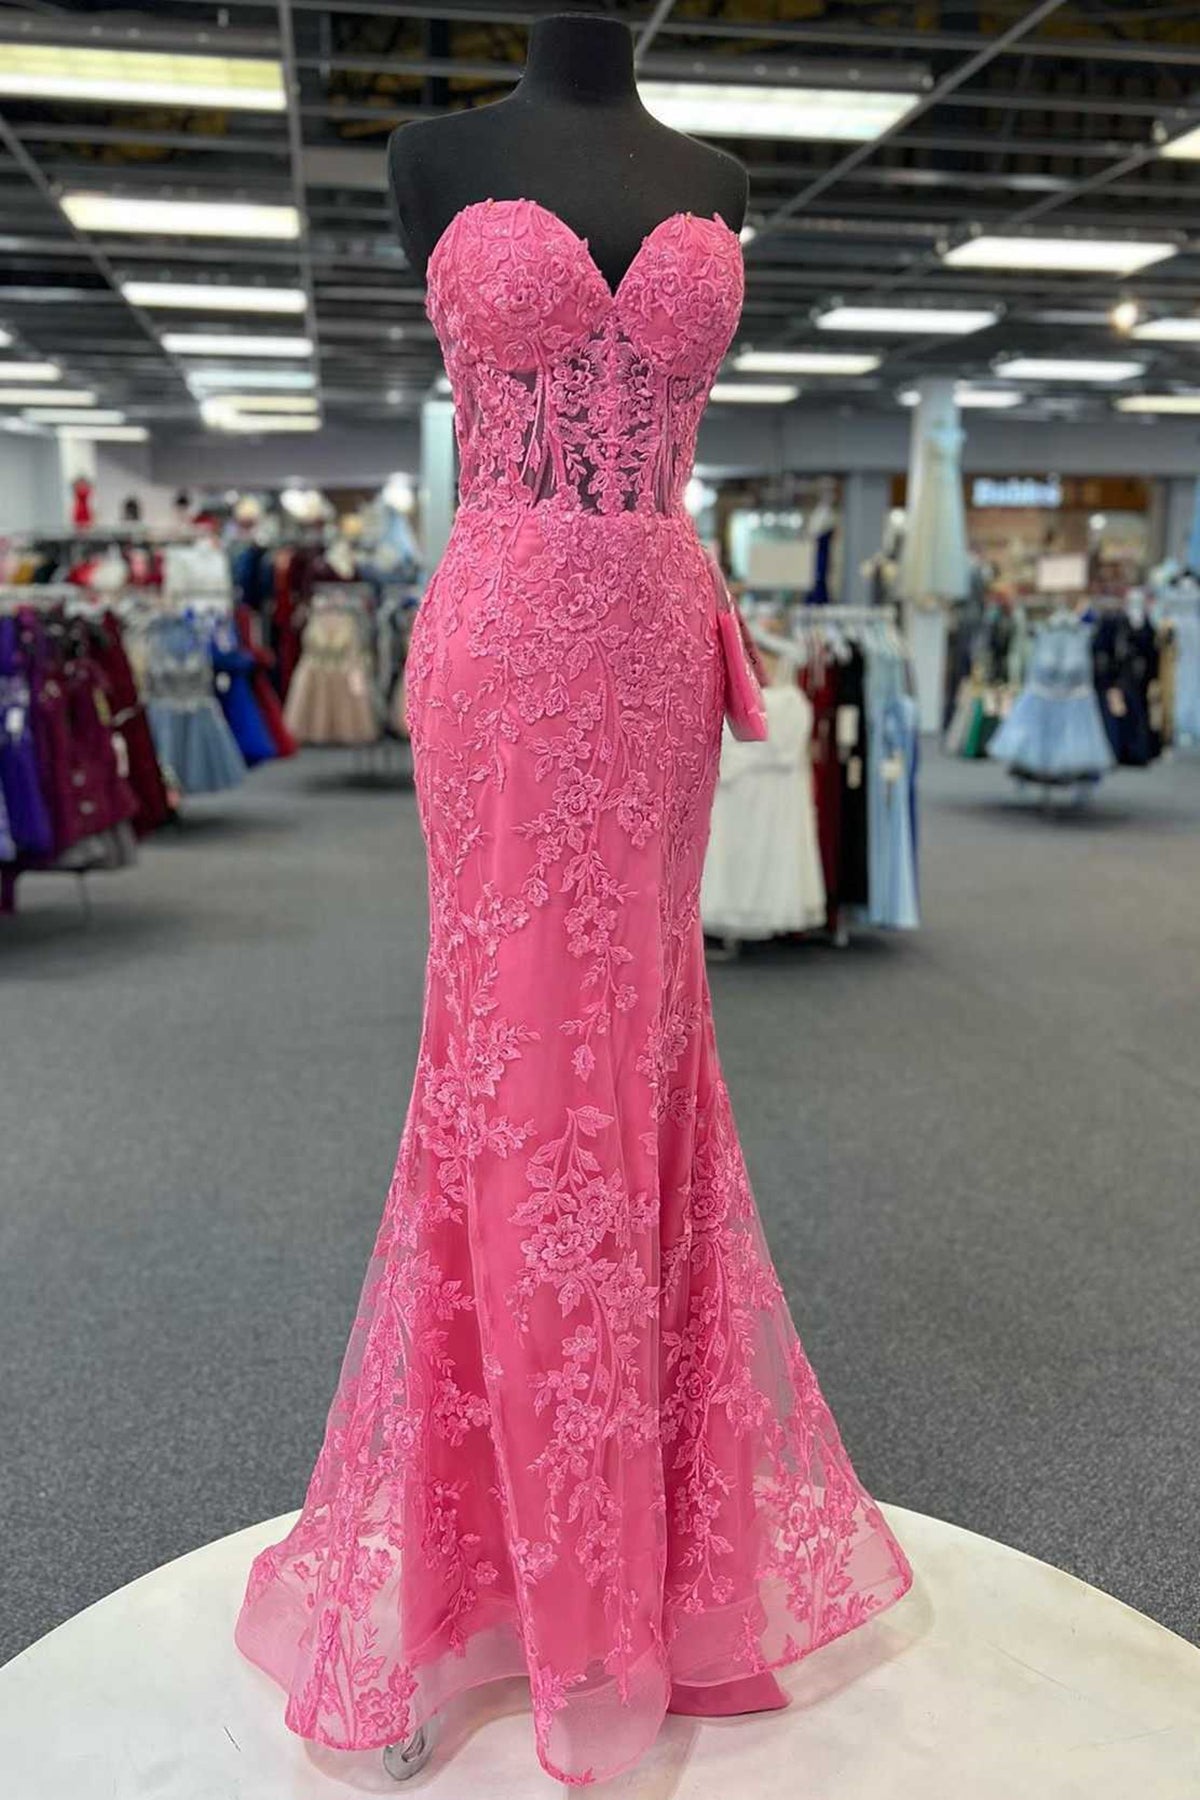 Hot Pink Mermaid Lace Prom Dresses, Hot Pink Mermaid Lace Formal Evening Dresses